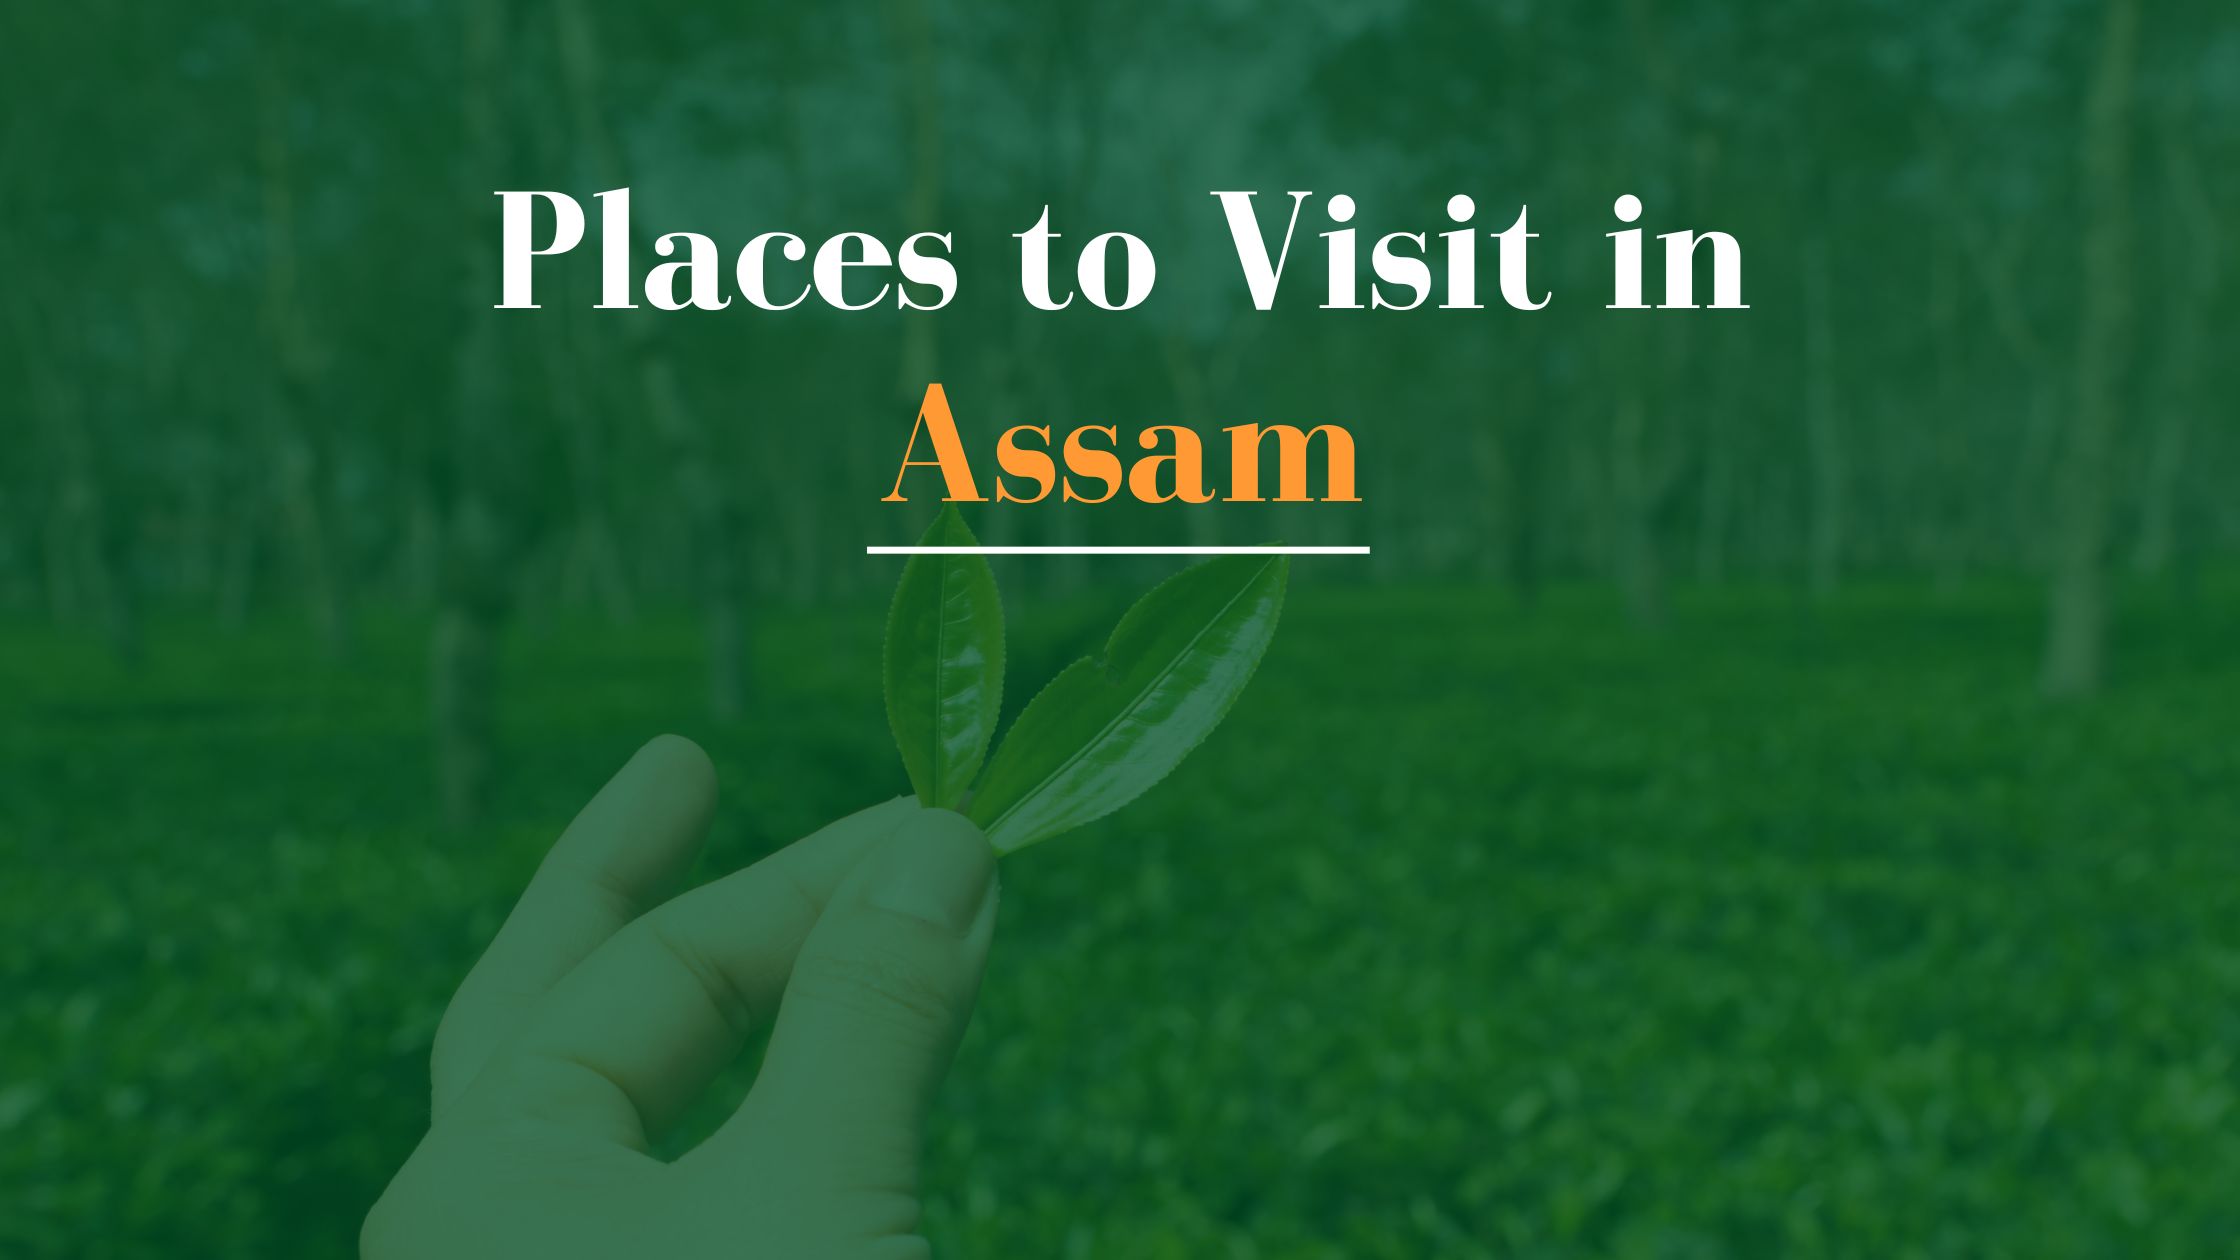 Places to Visit in Assam